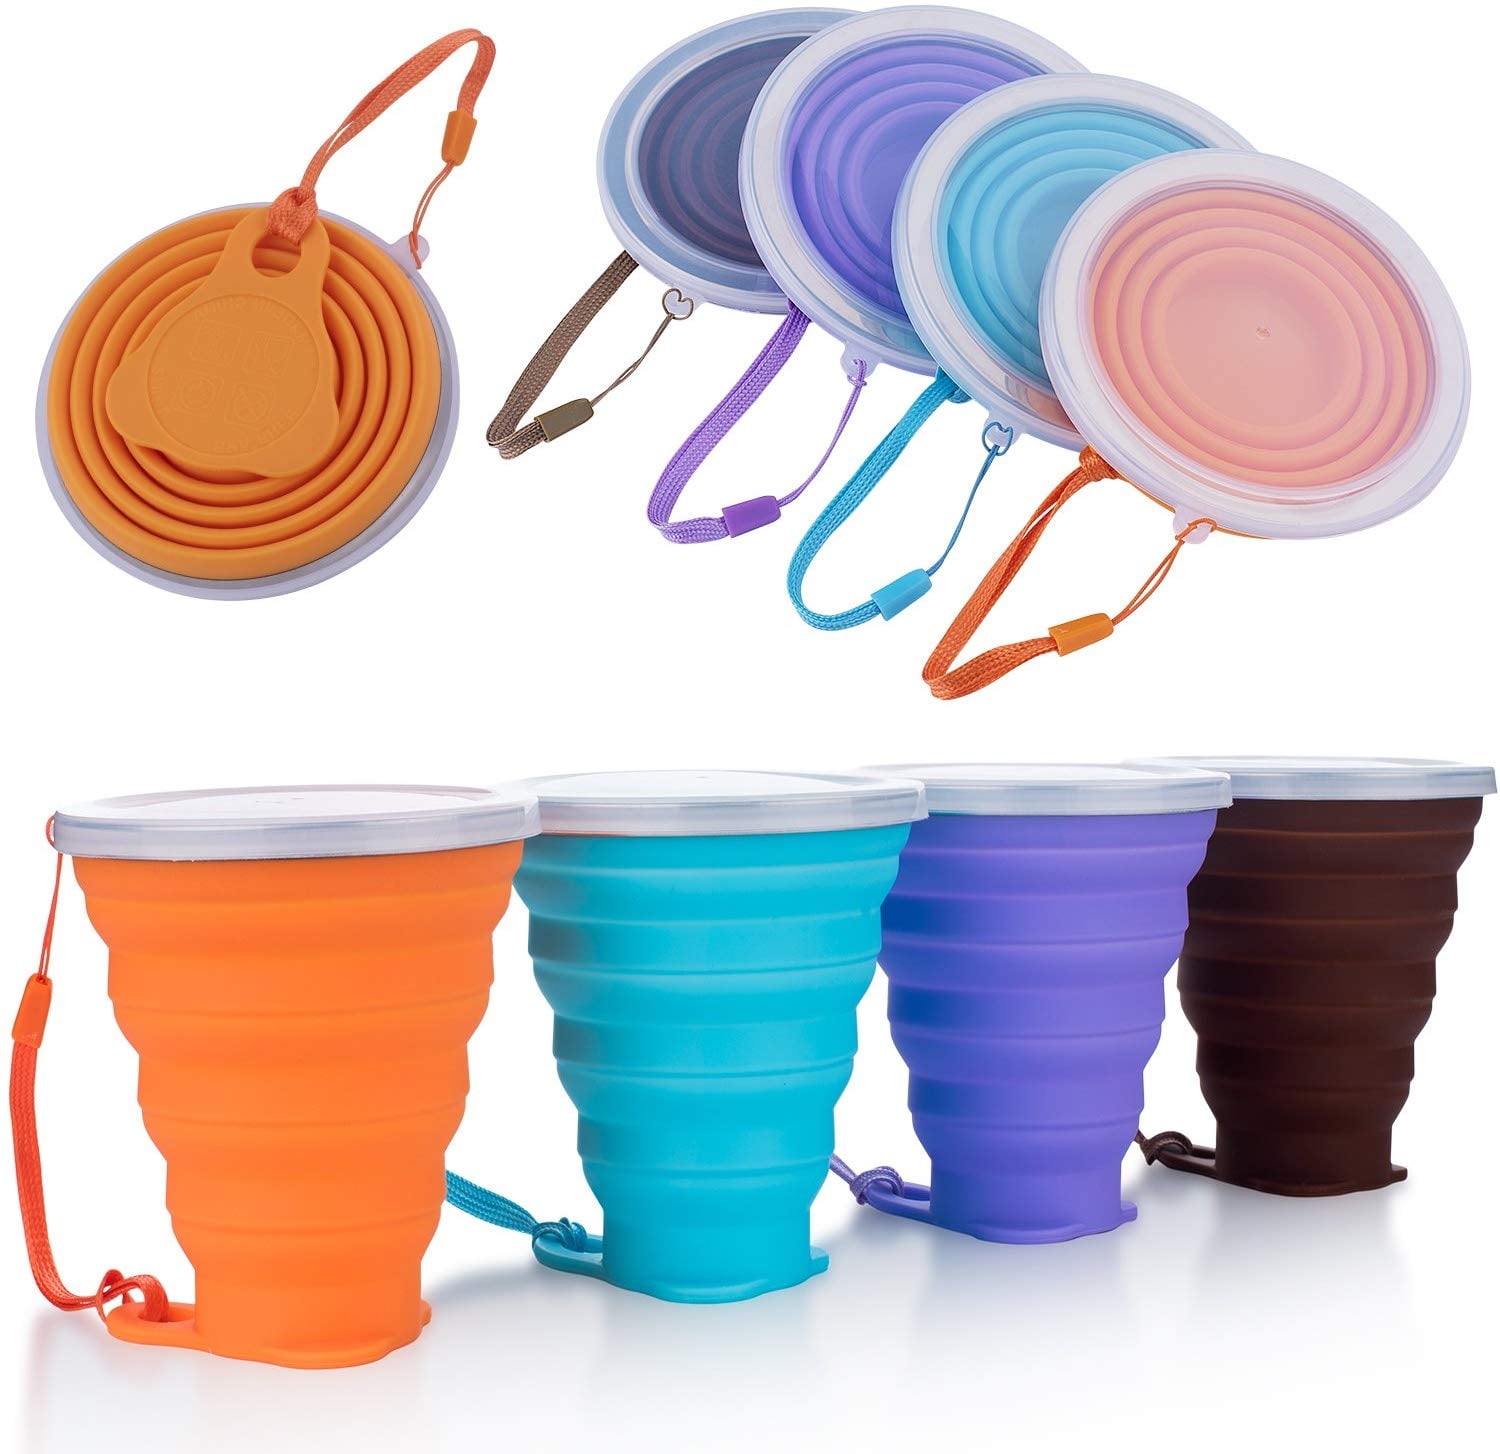 Details about   Silicone Collapsible Travel Cup Folding Camping Cup With Lid BPA Free 5 Pack 